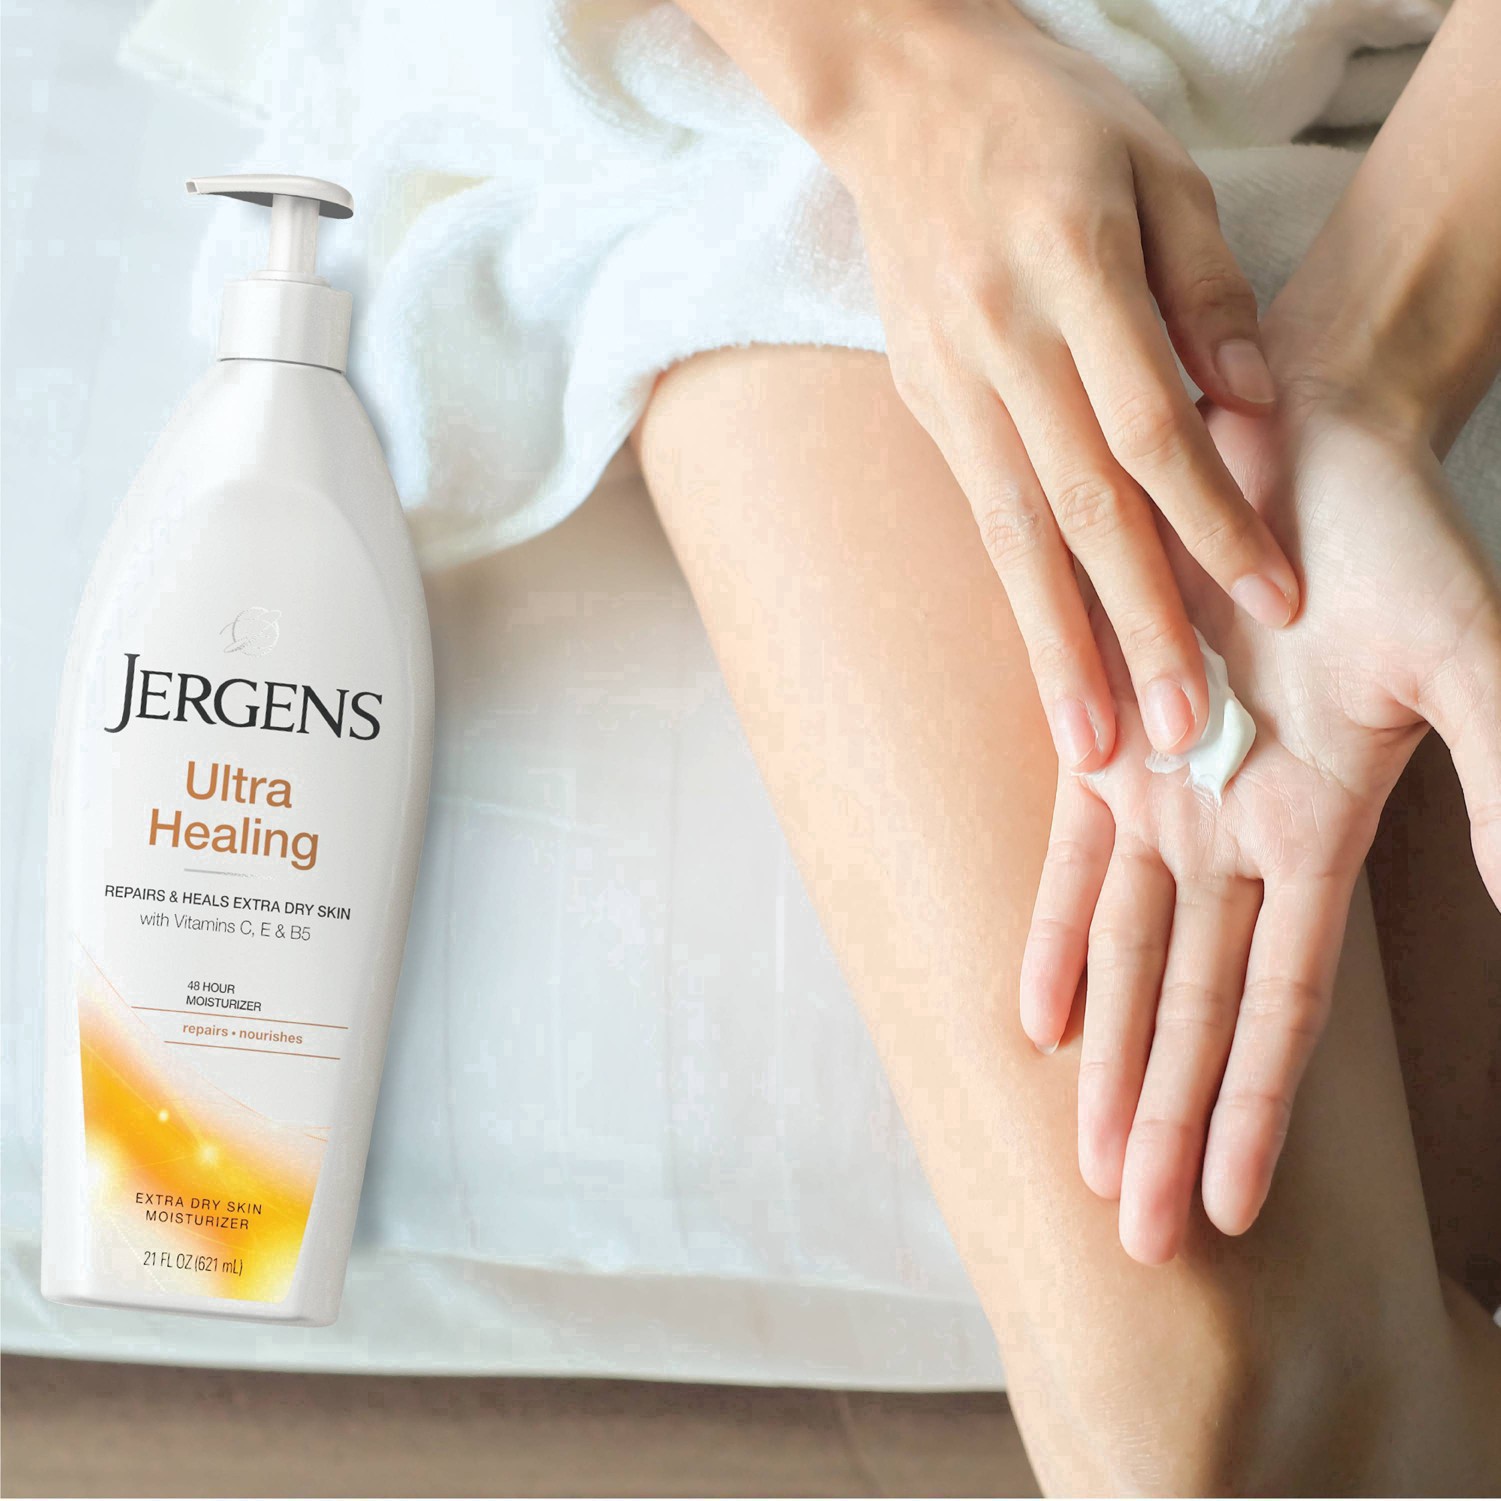 slide 64 of 67, Jergens Hand and Body Lotion, Dry Skin Moisturizer with Vitamins C,E, and B5, 21 fl oz